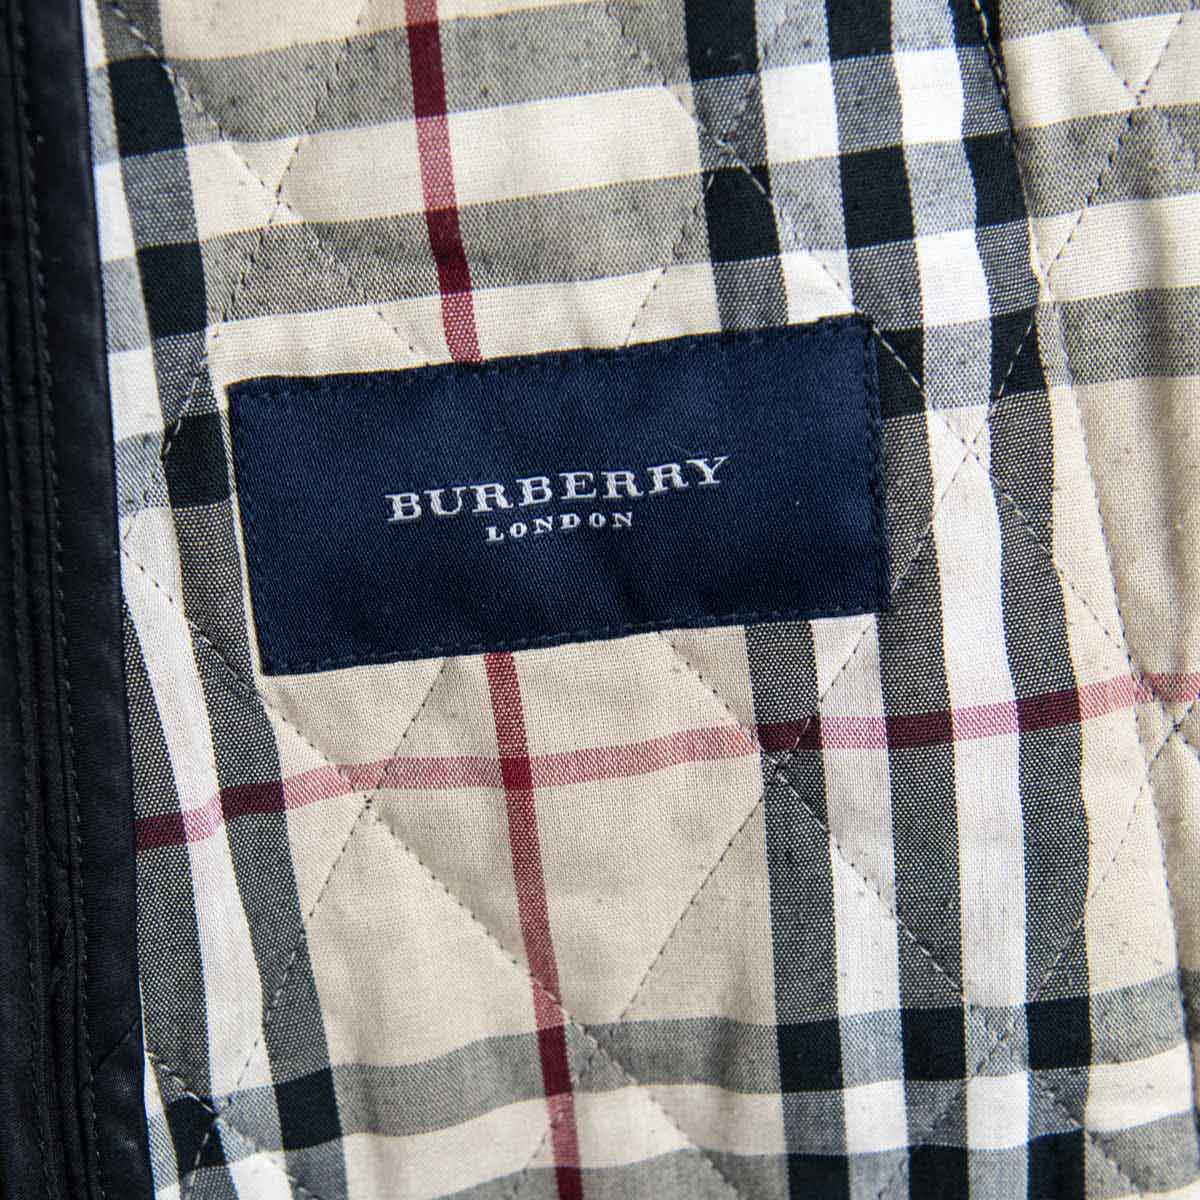 Burberry London Black Quilted Jacket 